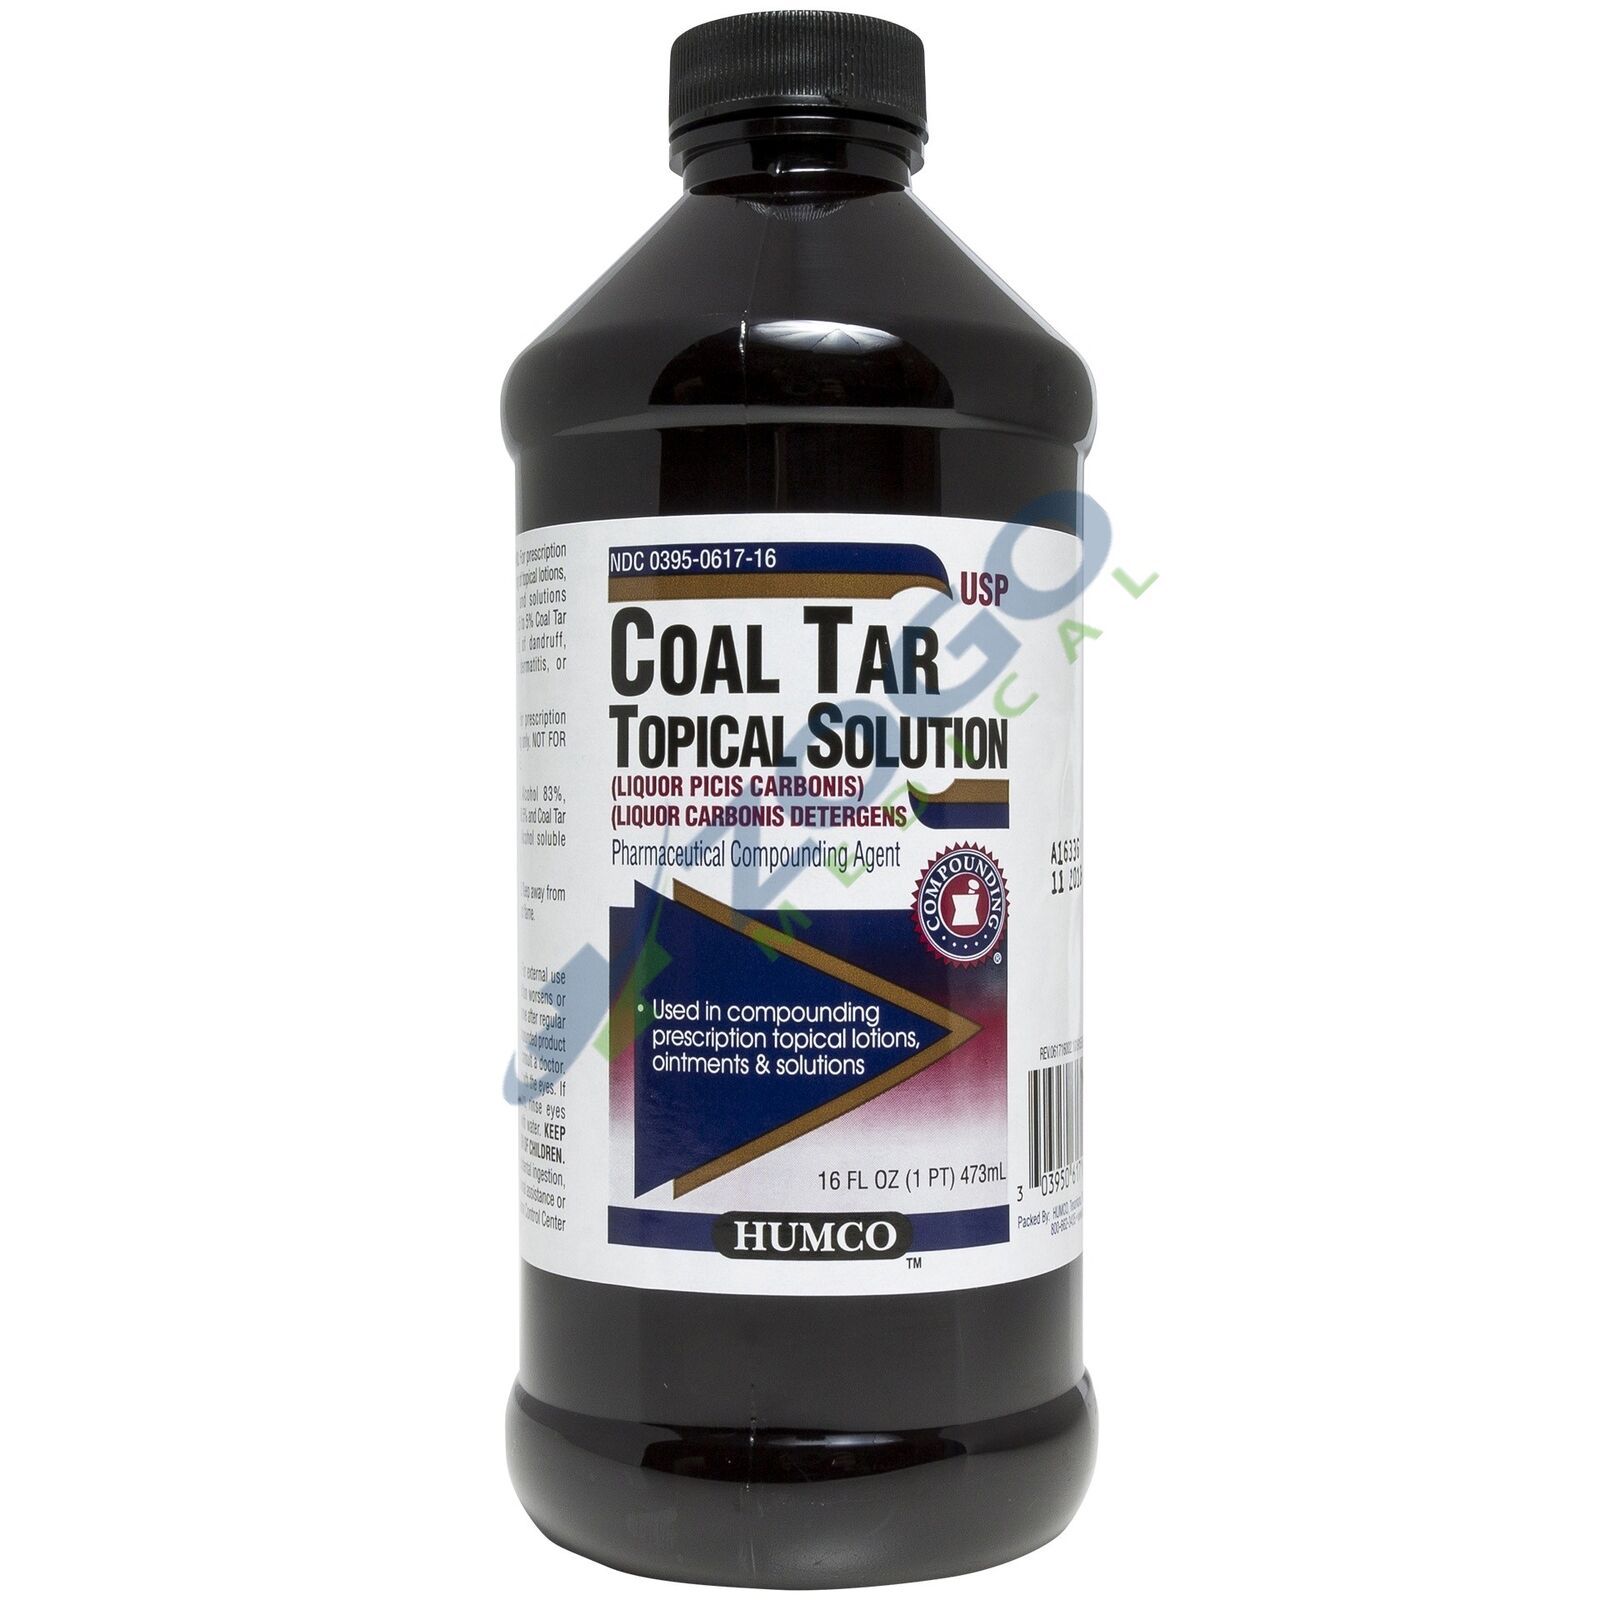 Humco Coal Tar Topical Solution 16 oz Bottle 303950617169